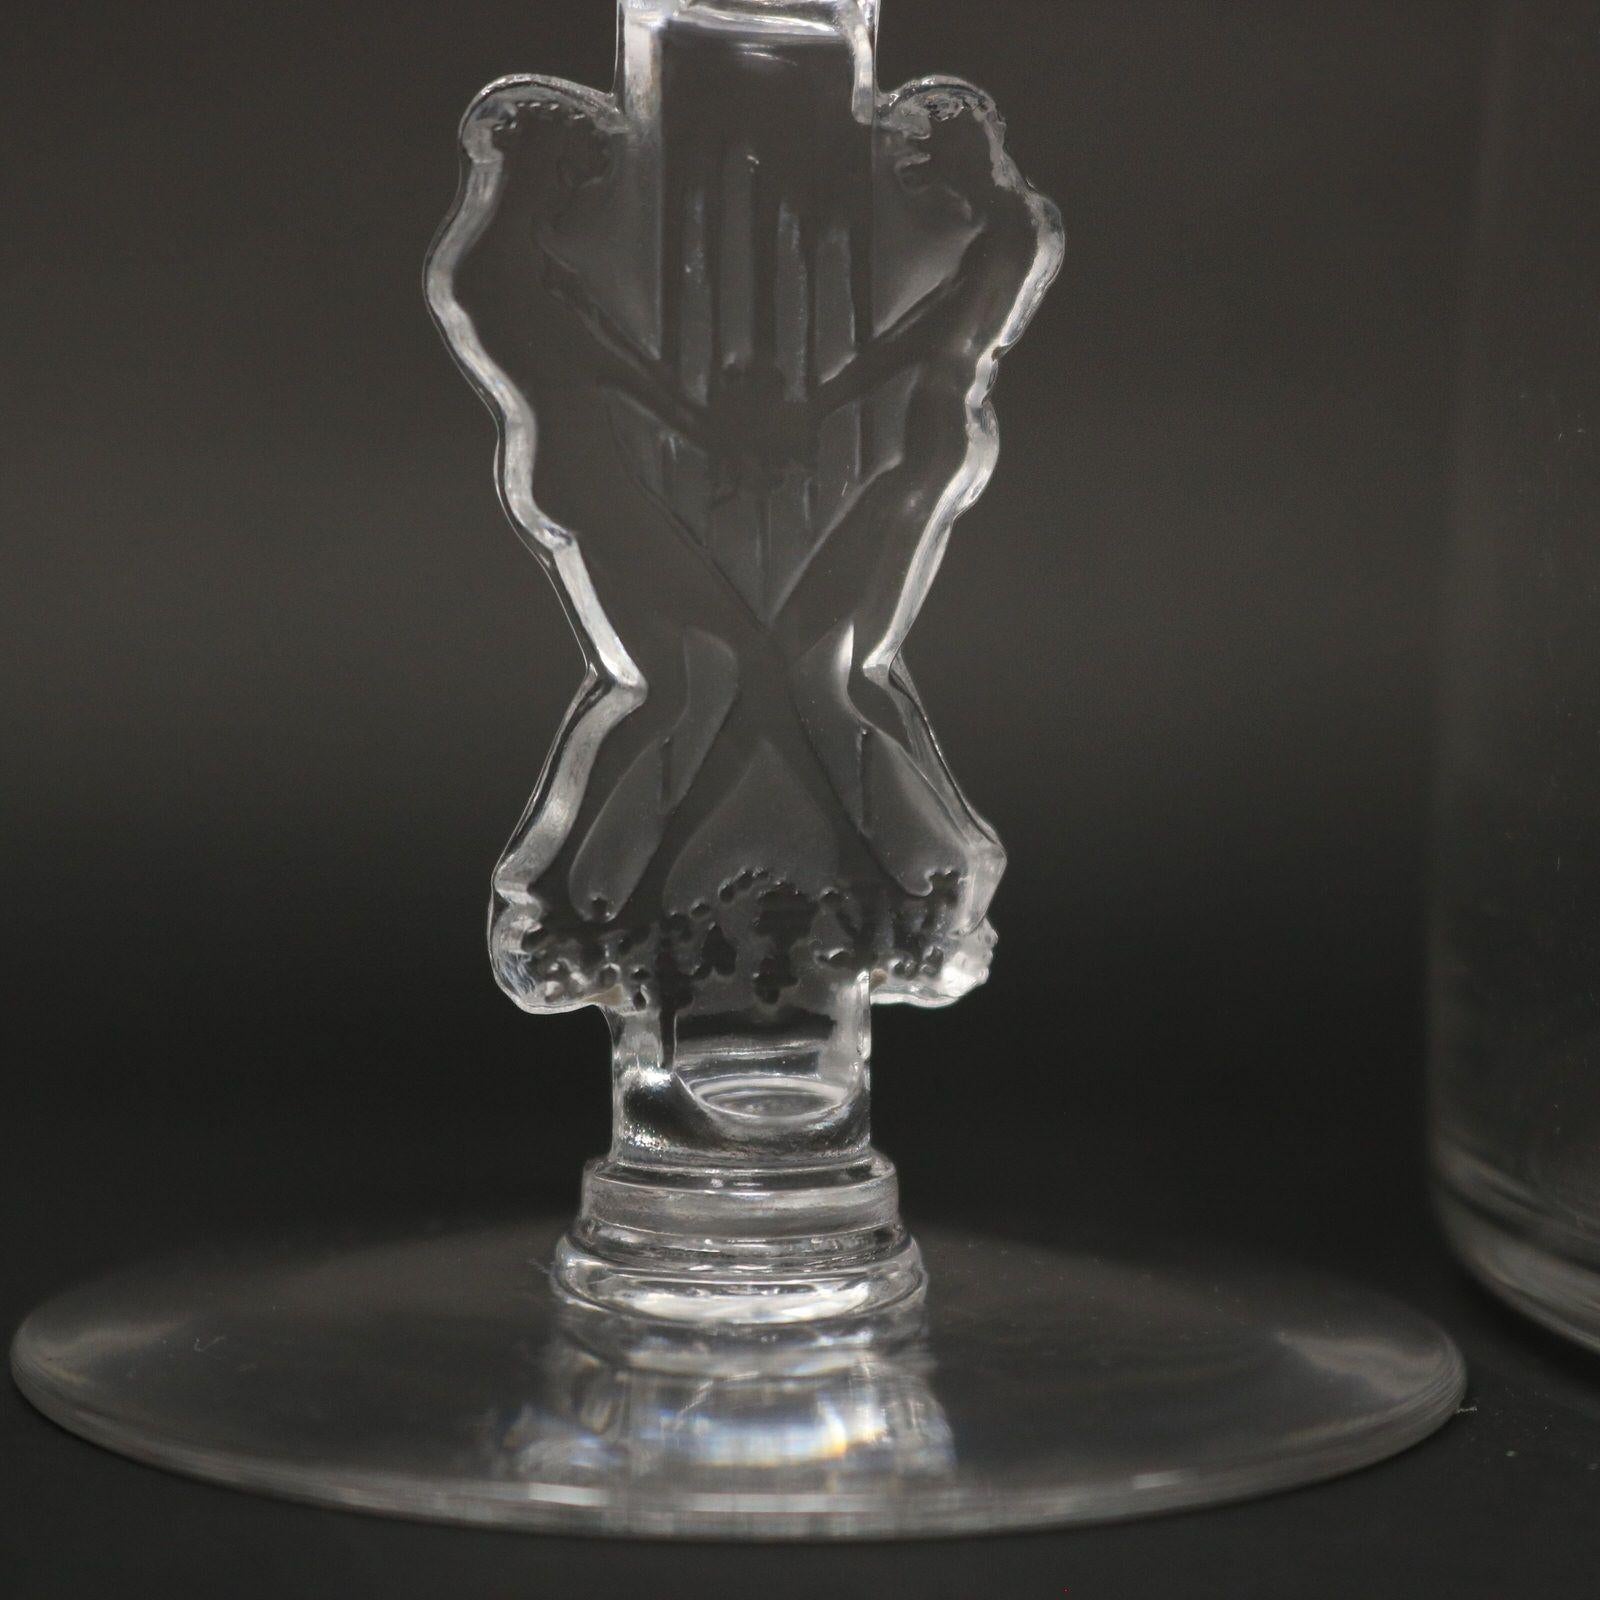 Early 20th Century Rene Lalique Glass Decanter with Pair of Glasses 'Strasbourg' Design